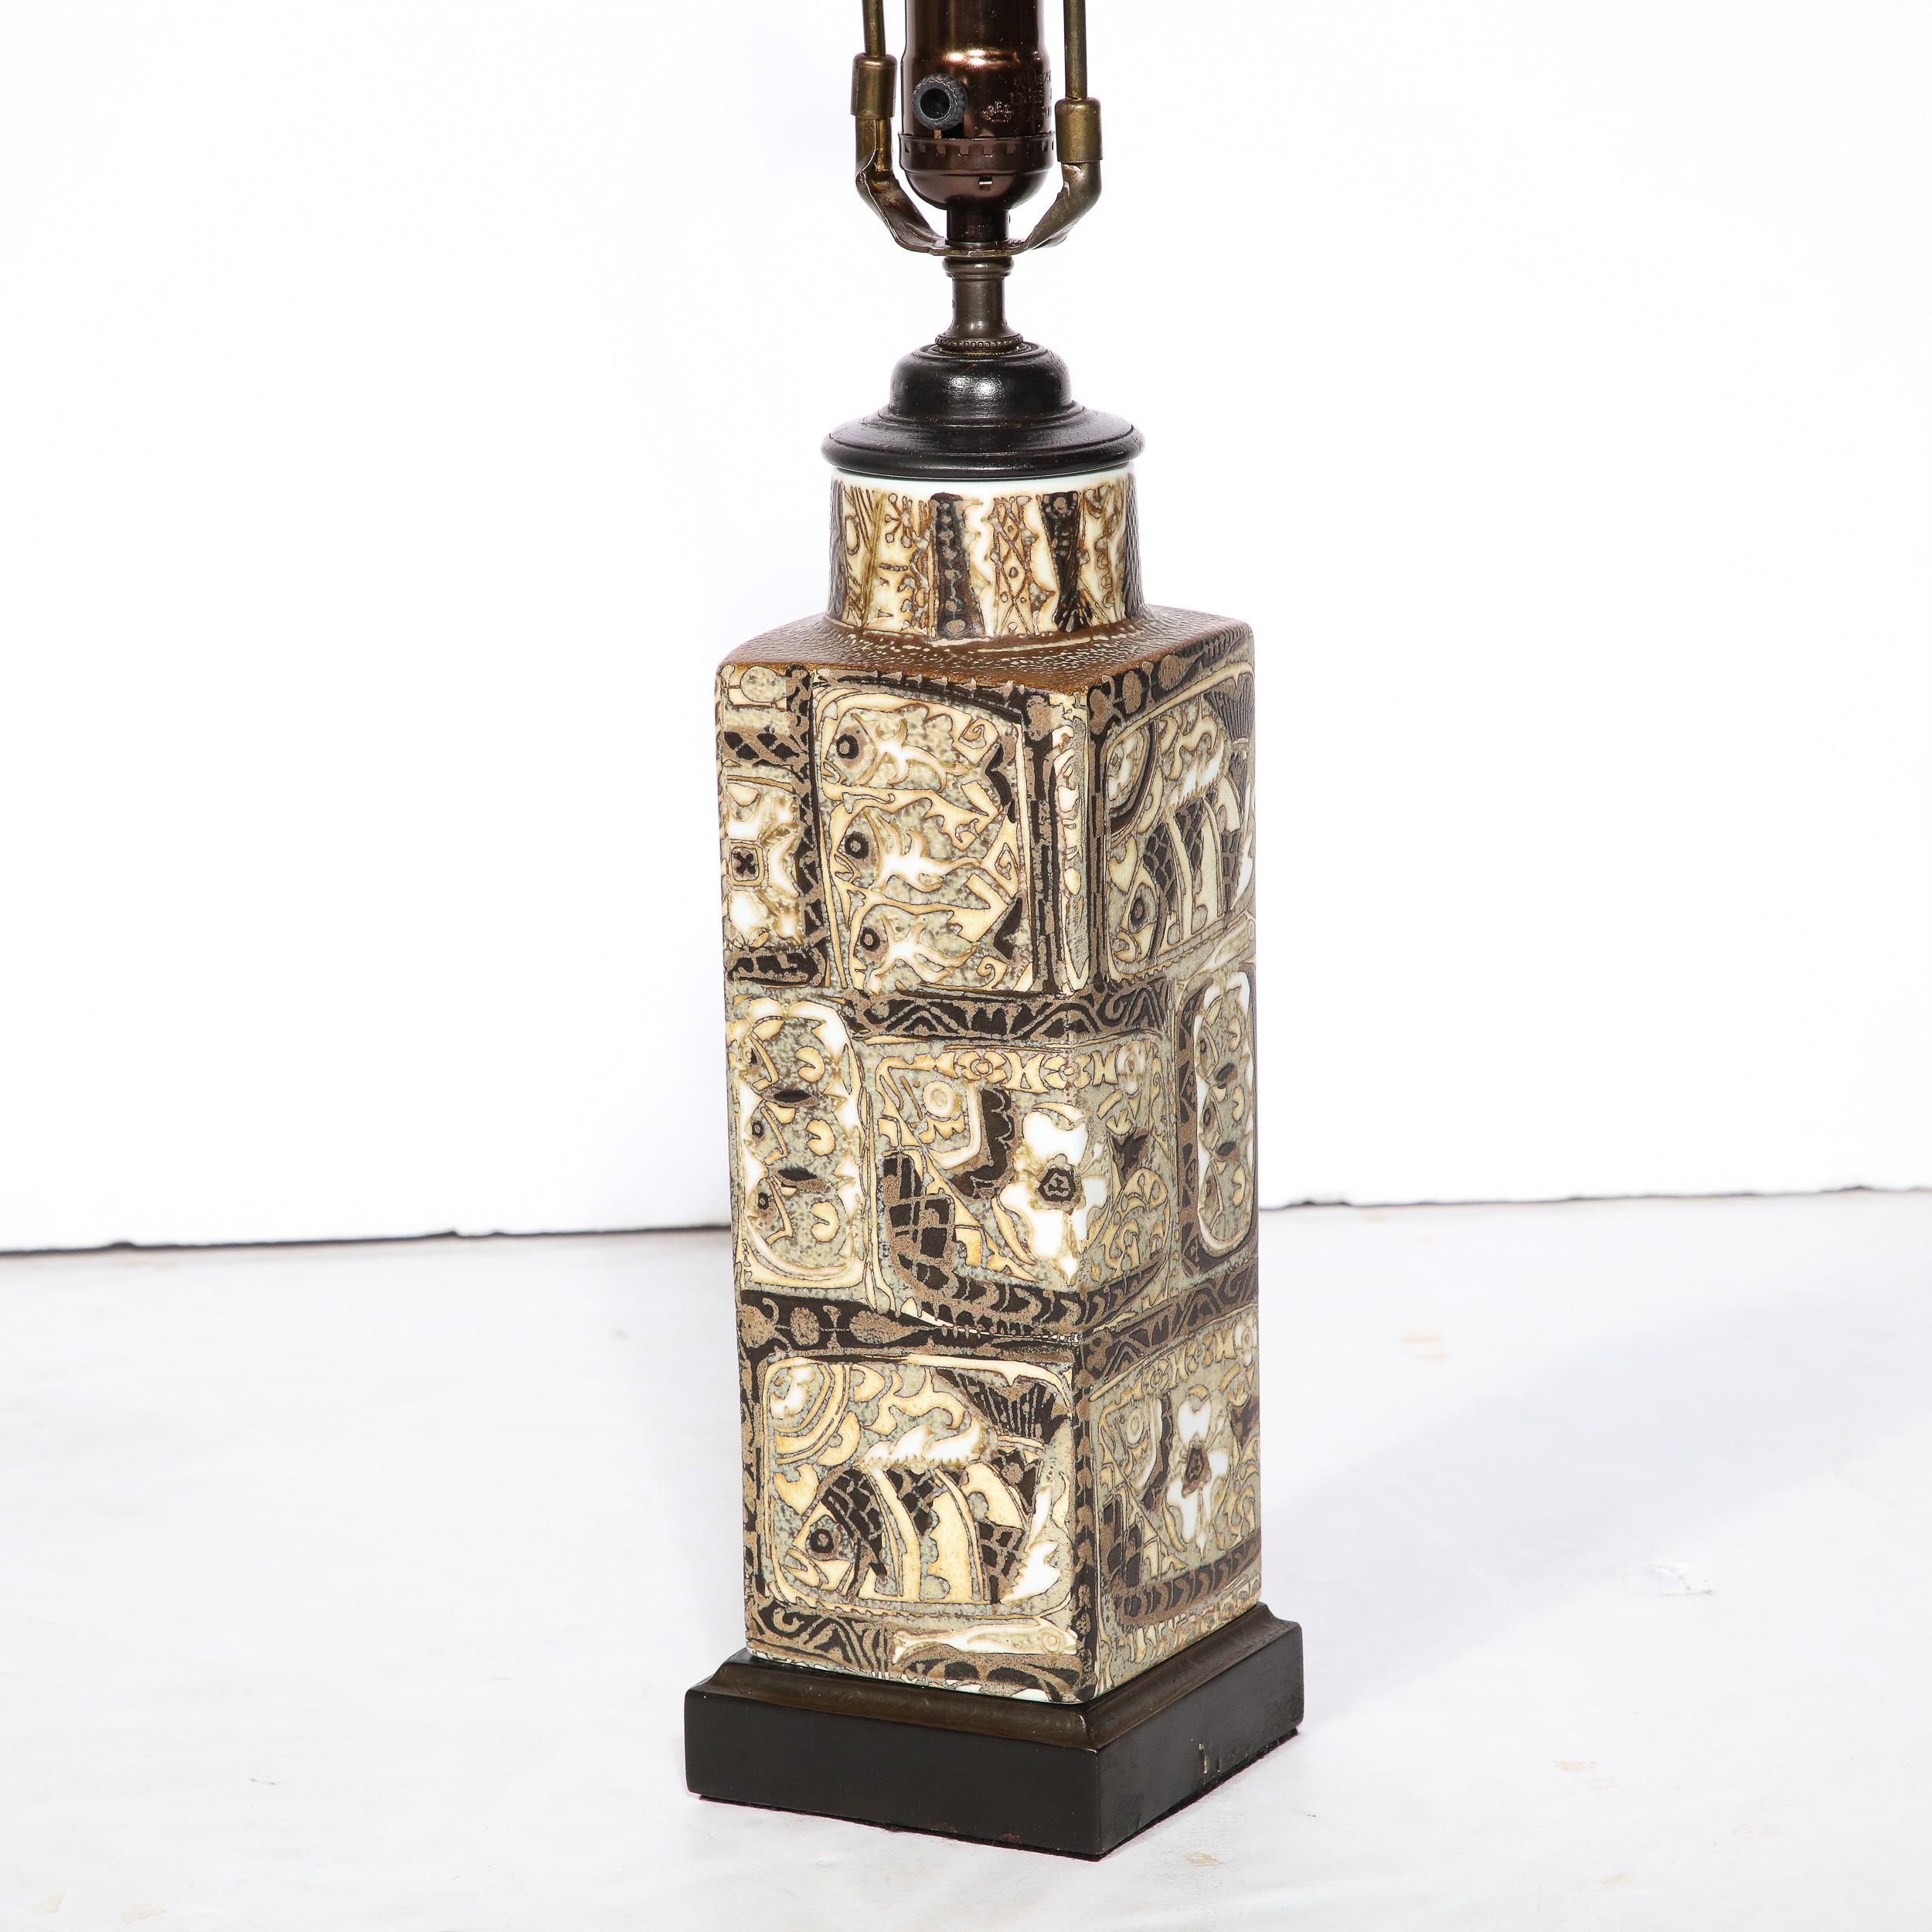 Hand Painted Ceramic Table Lamp with Oceanic Motifs by Royal Copenhagen 1